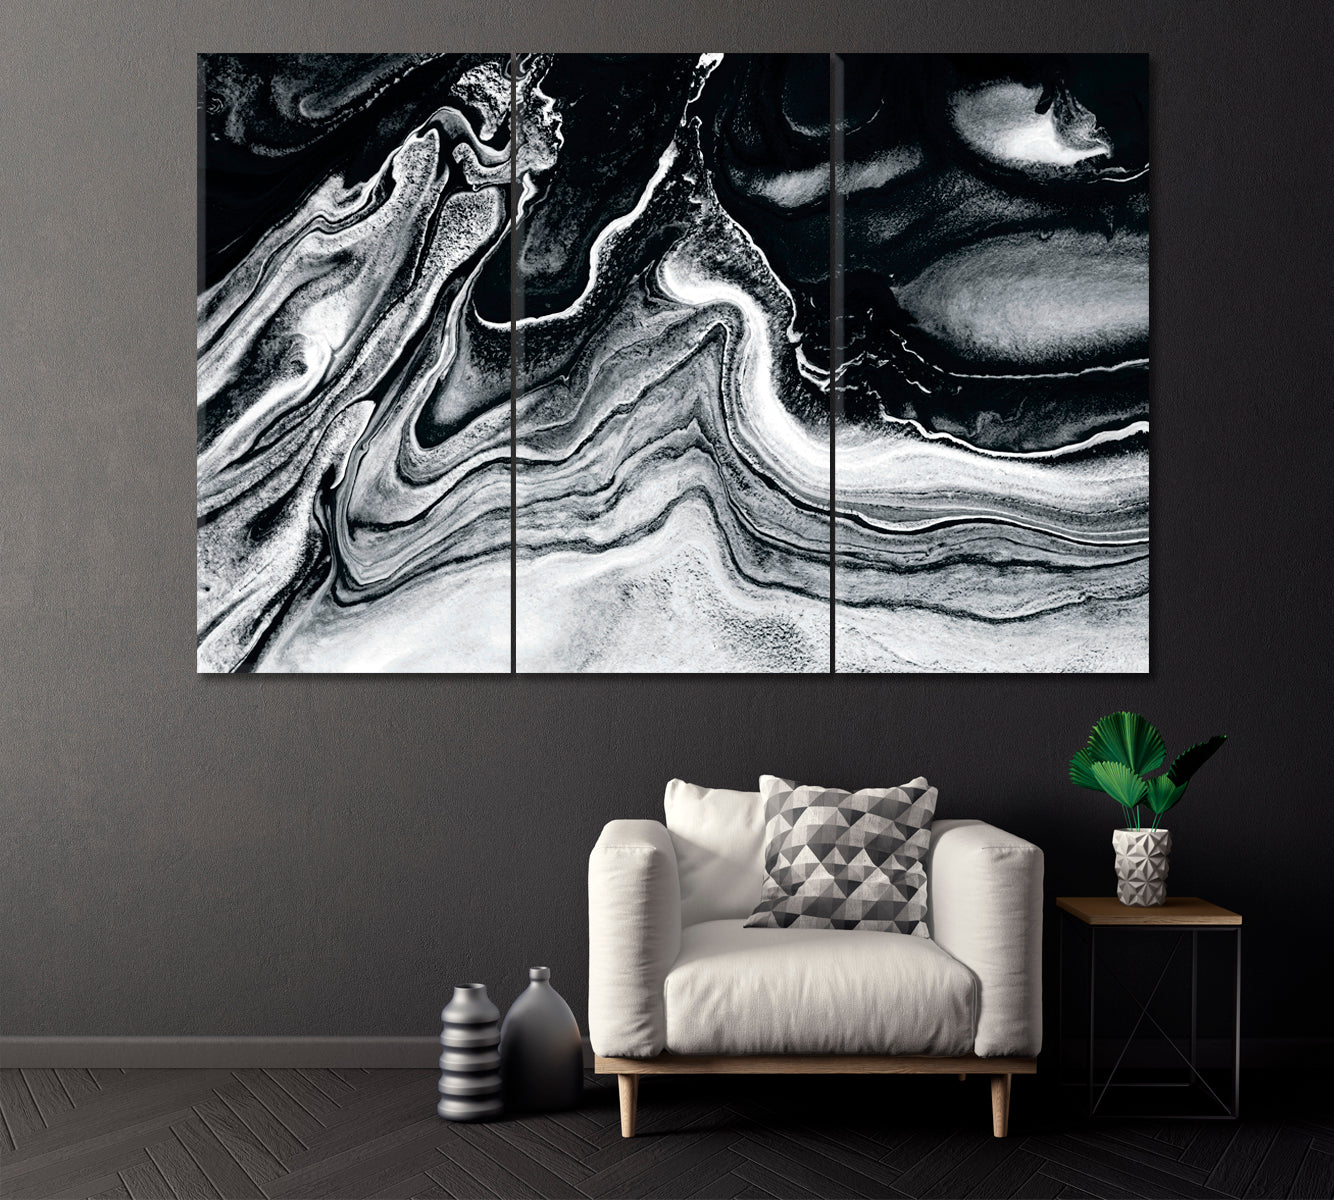 Abstract Black and White Wavy Marble Canvas Print ArtLexy 3 Panels 36"x24" inches 